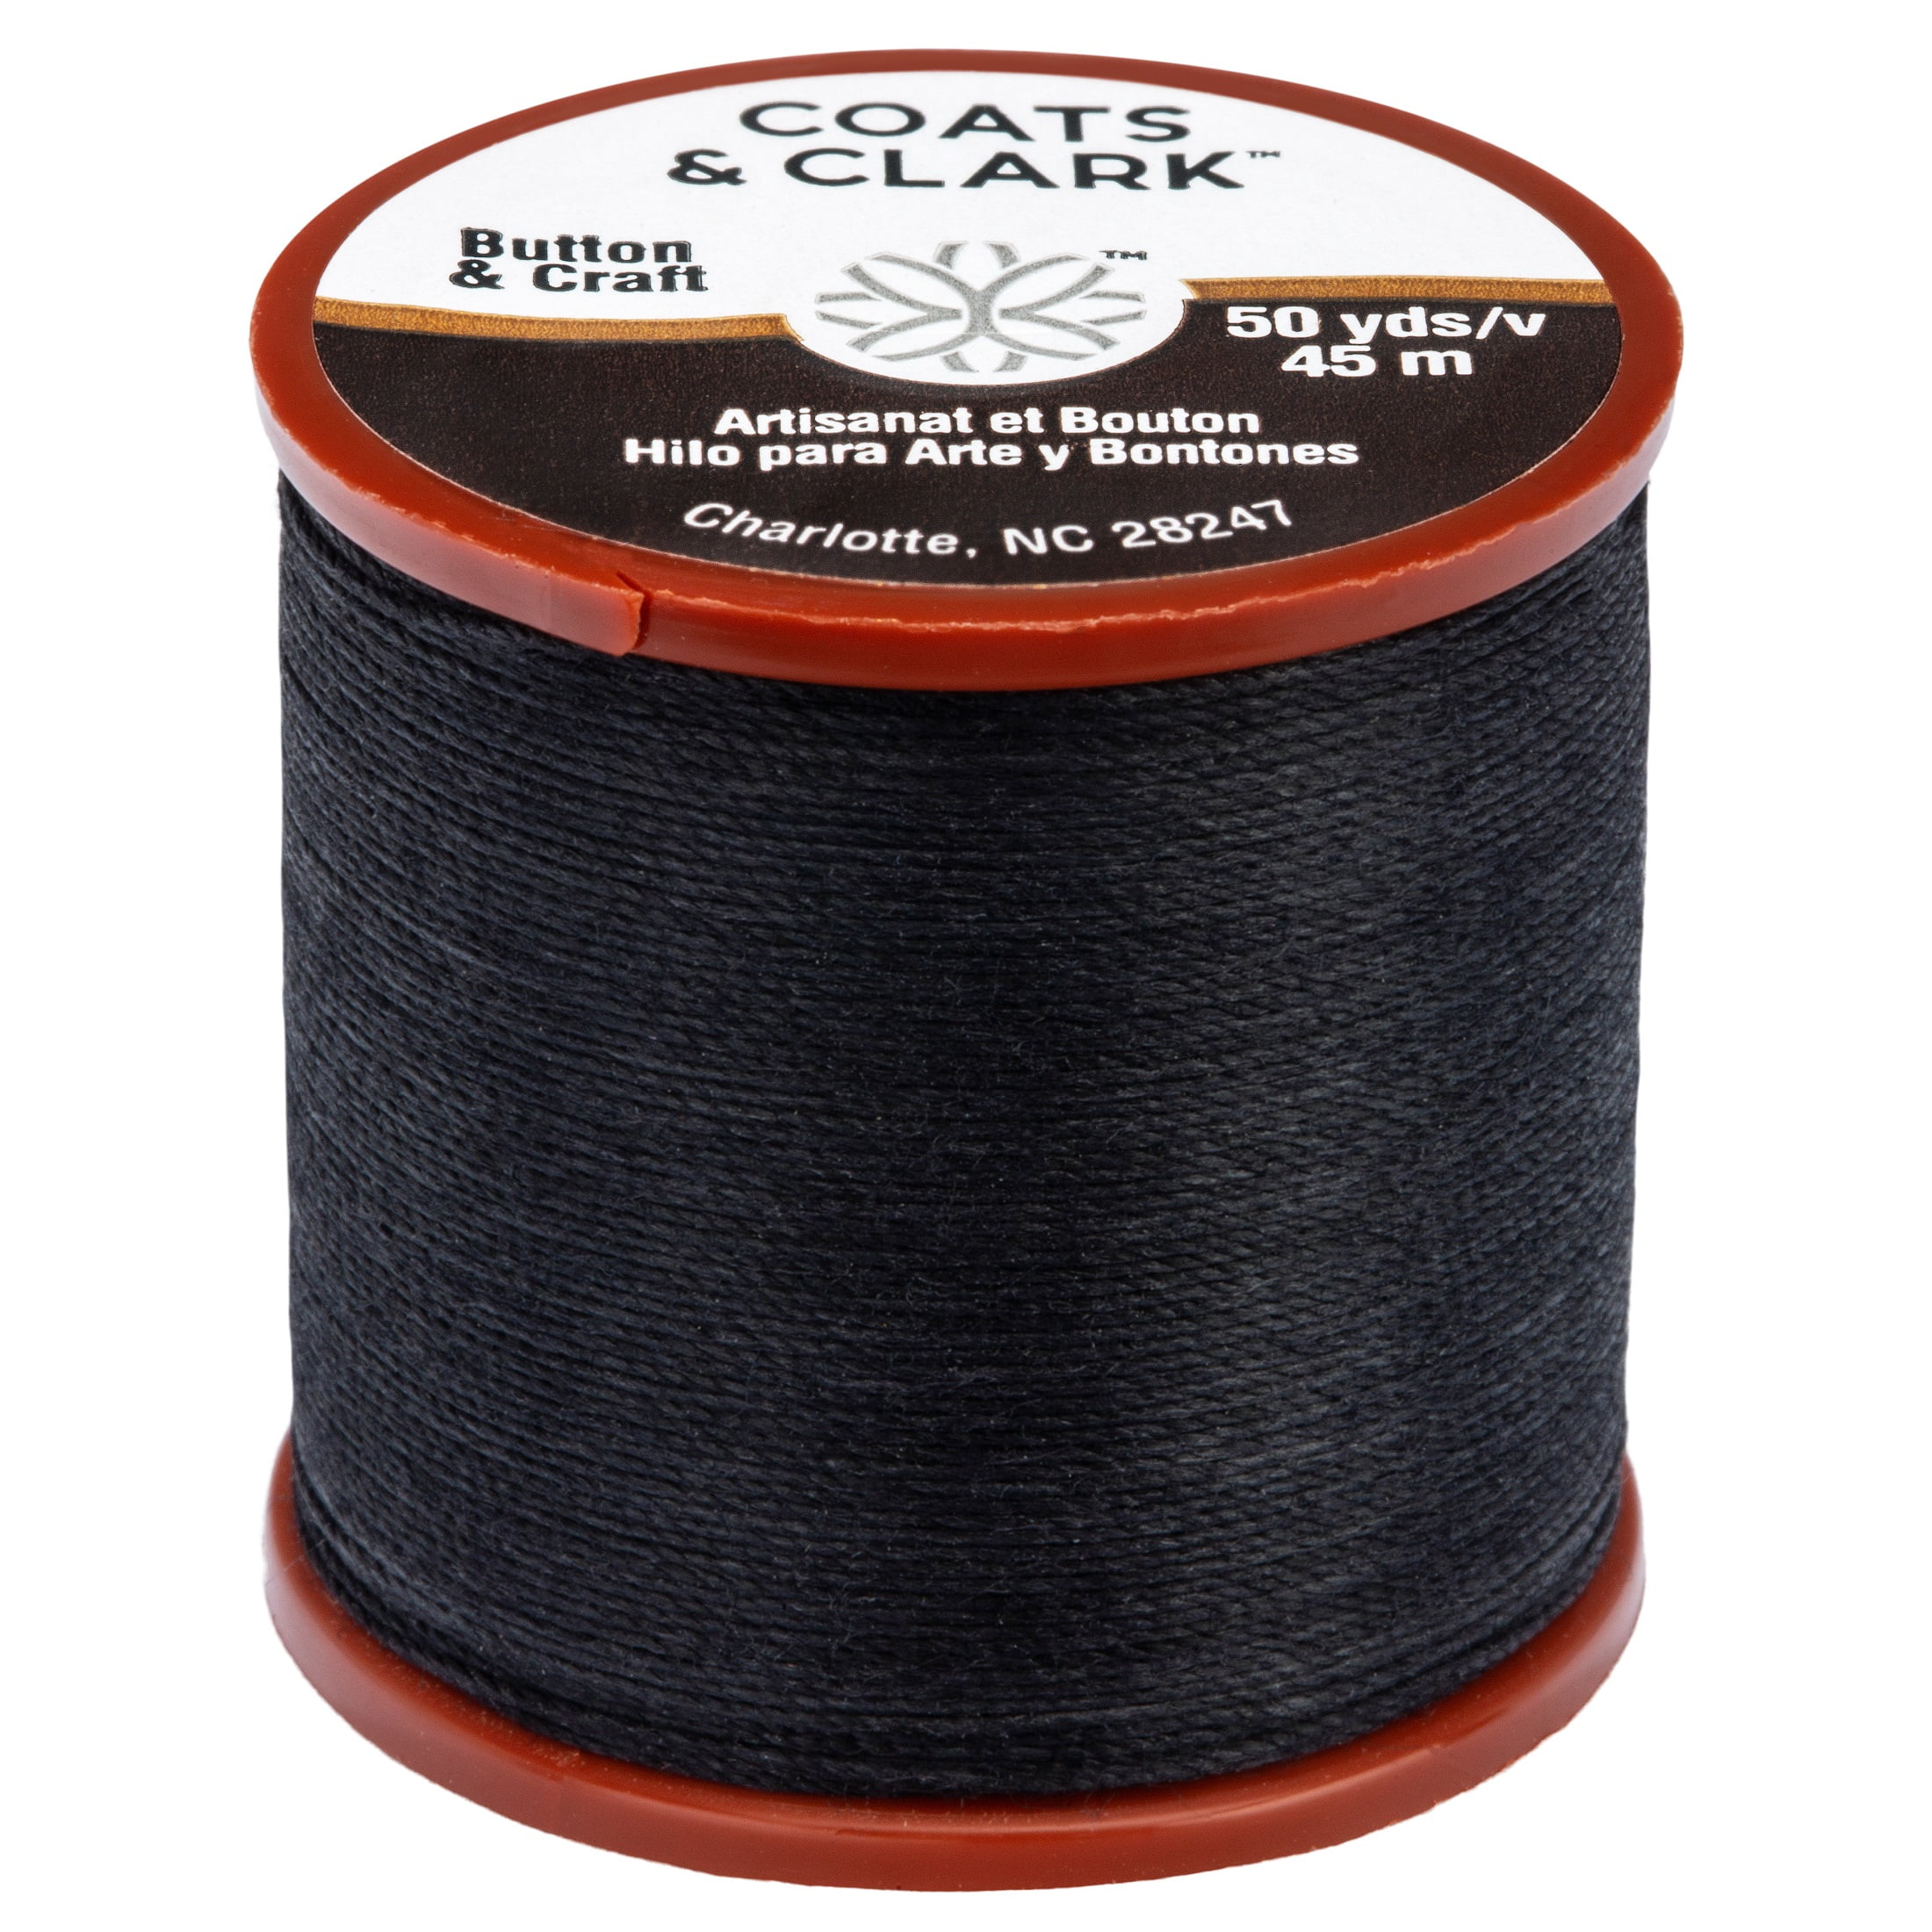 Coats & Clark S920 Dual Duty Plus Button And Craft Thread Coats & Clark  strong thread [Coats and Clark S920] - $3.38 : Buy Cheap & Discount Fashion  Fabric Online